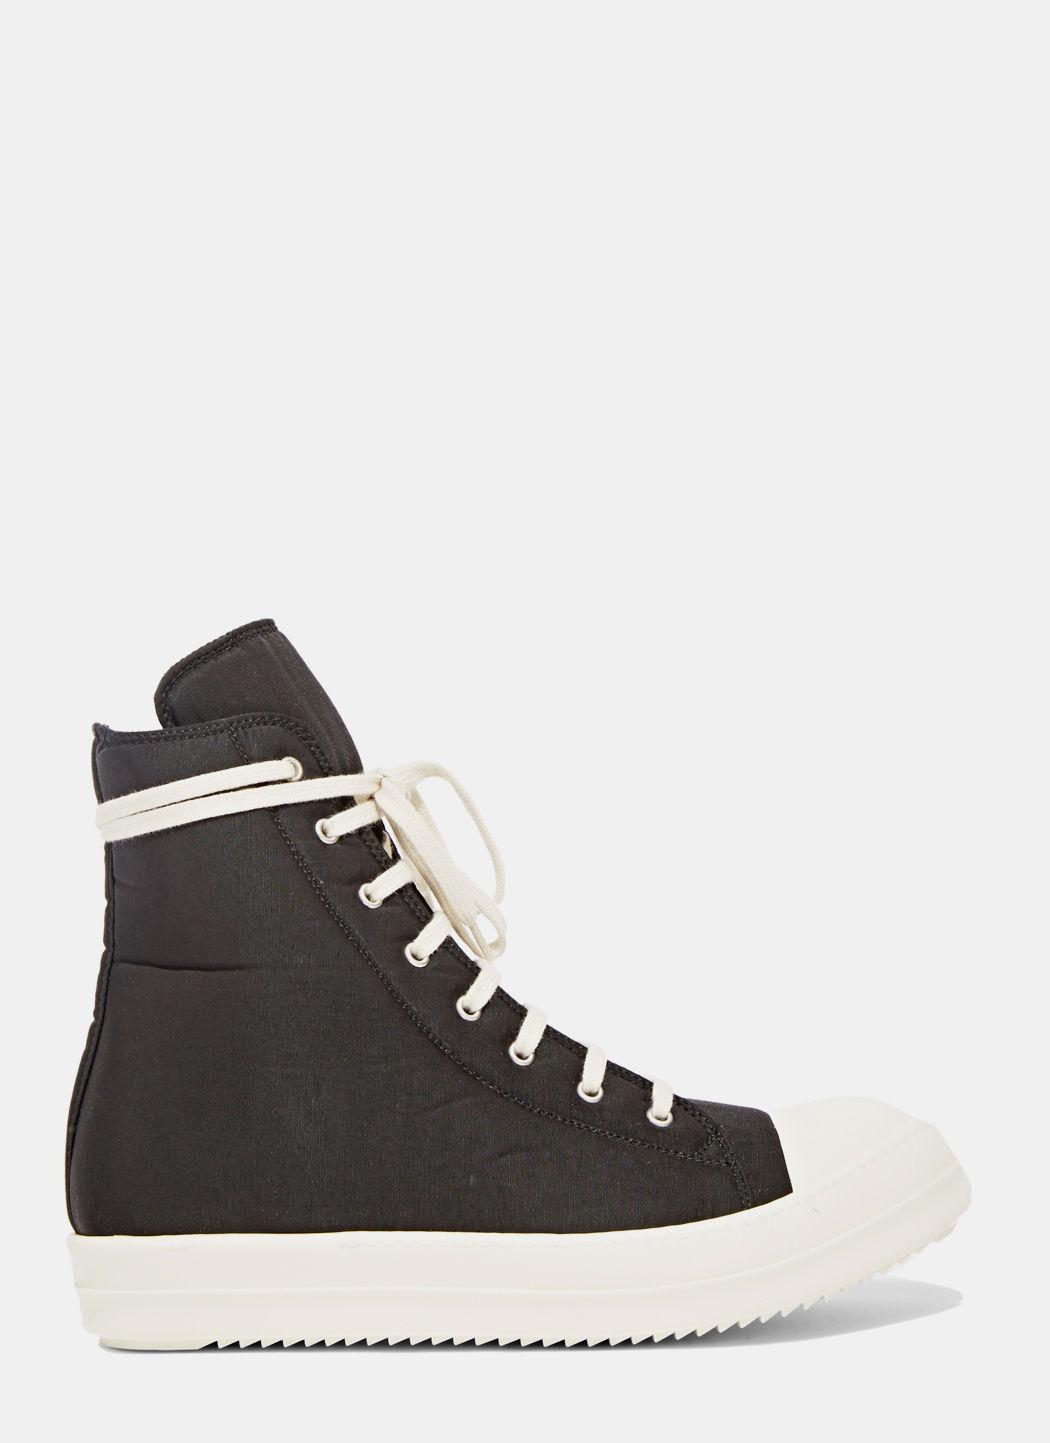 Rick Owens Drkshdw Men's Embroidered High Sneakers From Aw15 In Black ...